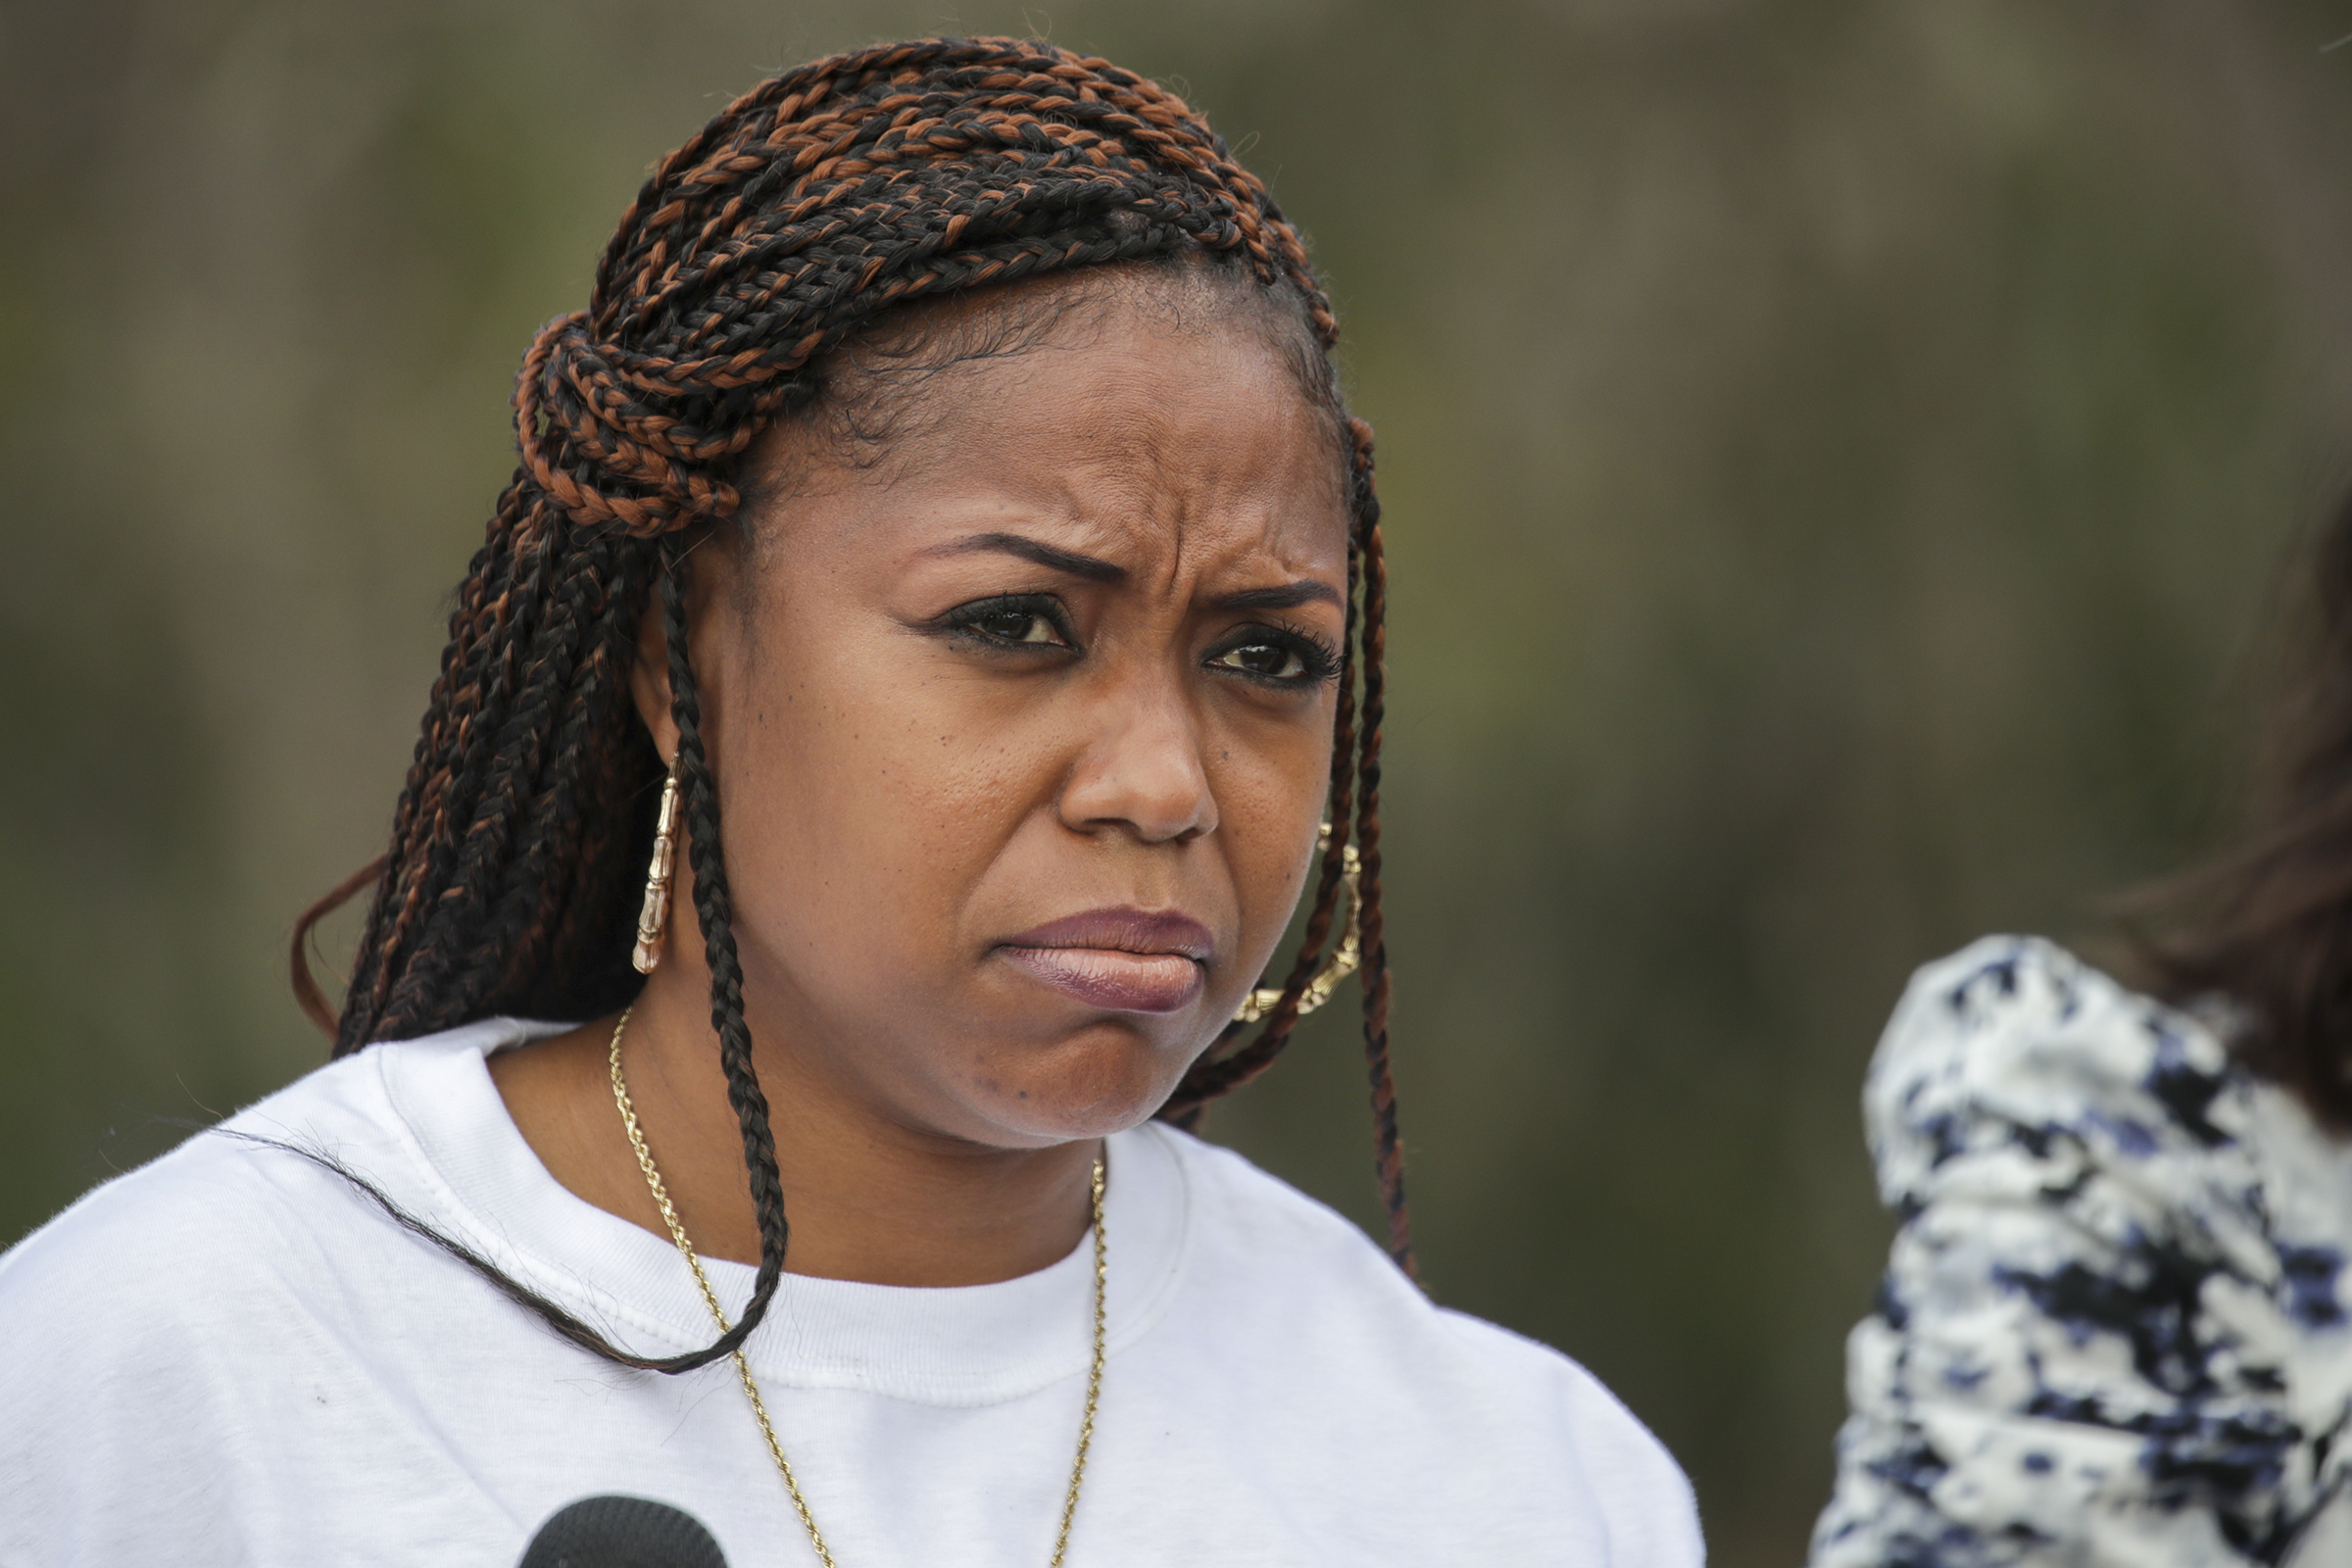 PHOTO: Lora King, daughter of Rodney King, on the anniversary of her father's death addresses a press conference held at Ladera Park, June 17, 2021 in Los Angeles.